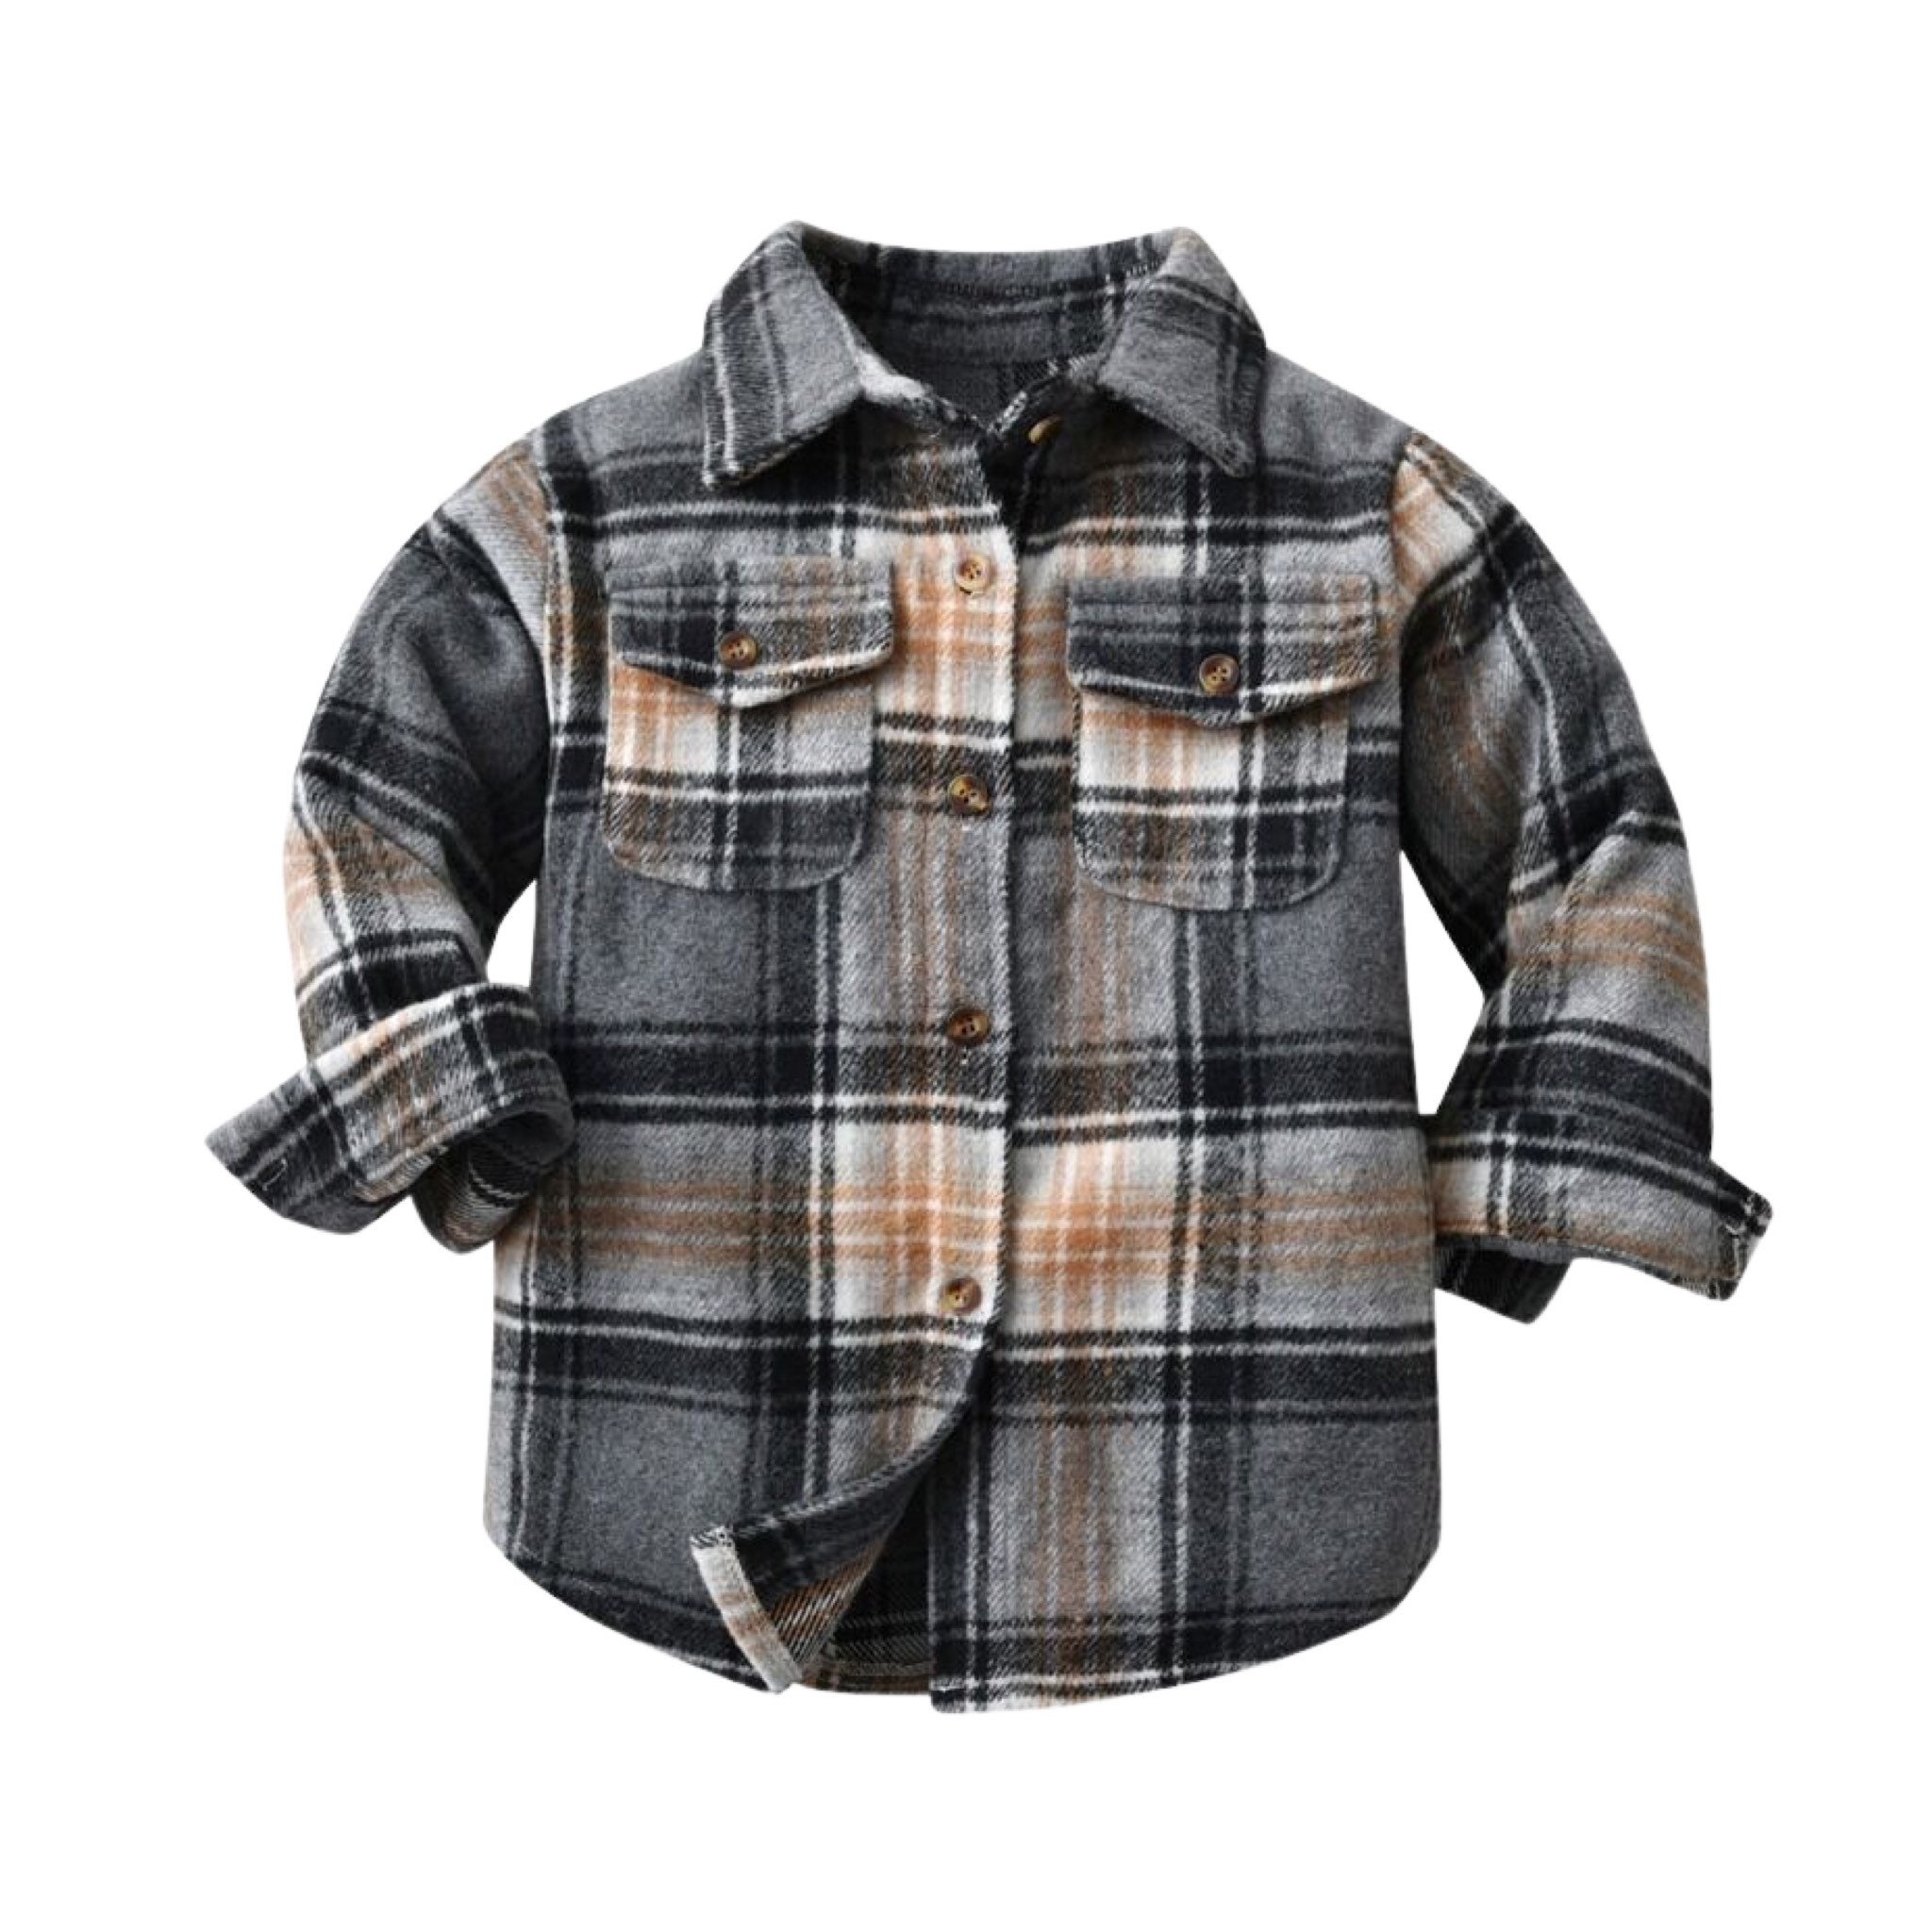 Newborn Baby Boy Girls Plaid Outfit Flannel Romper Tops Infant Long Sleeve Button Down Plaid Casual Bodysuit Clothes 